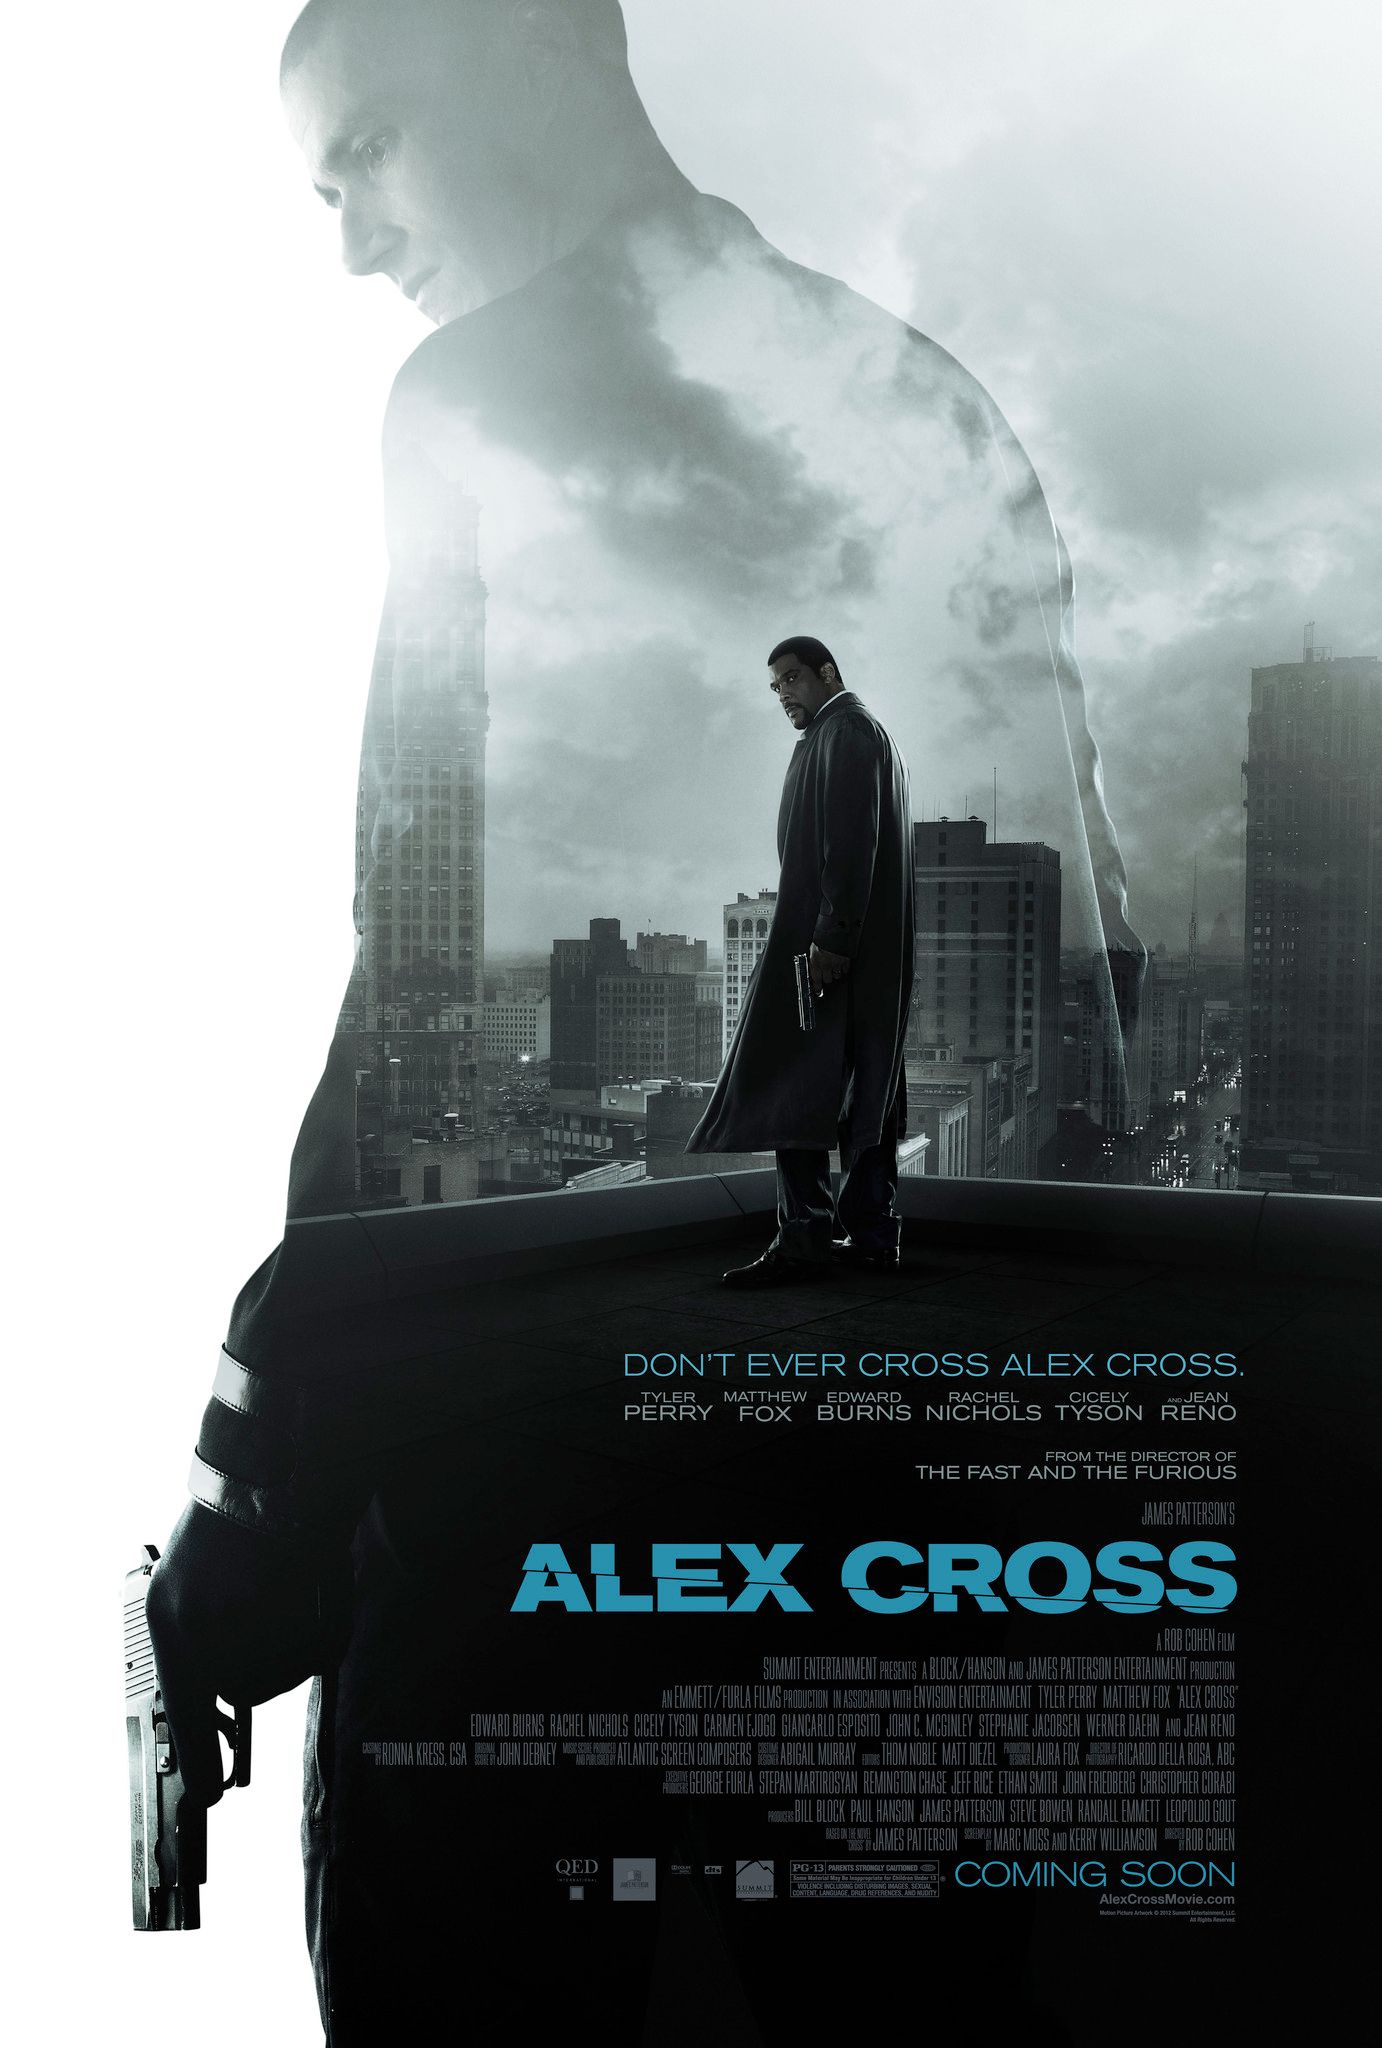 The poster for the Alex Cross movie starring Tyler Perry